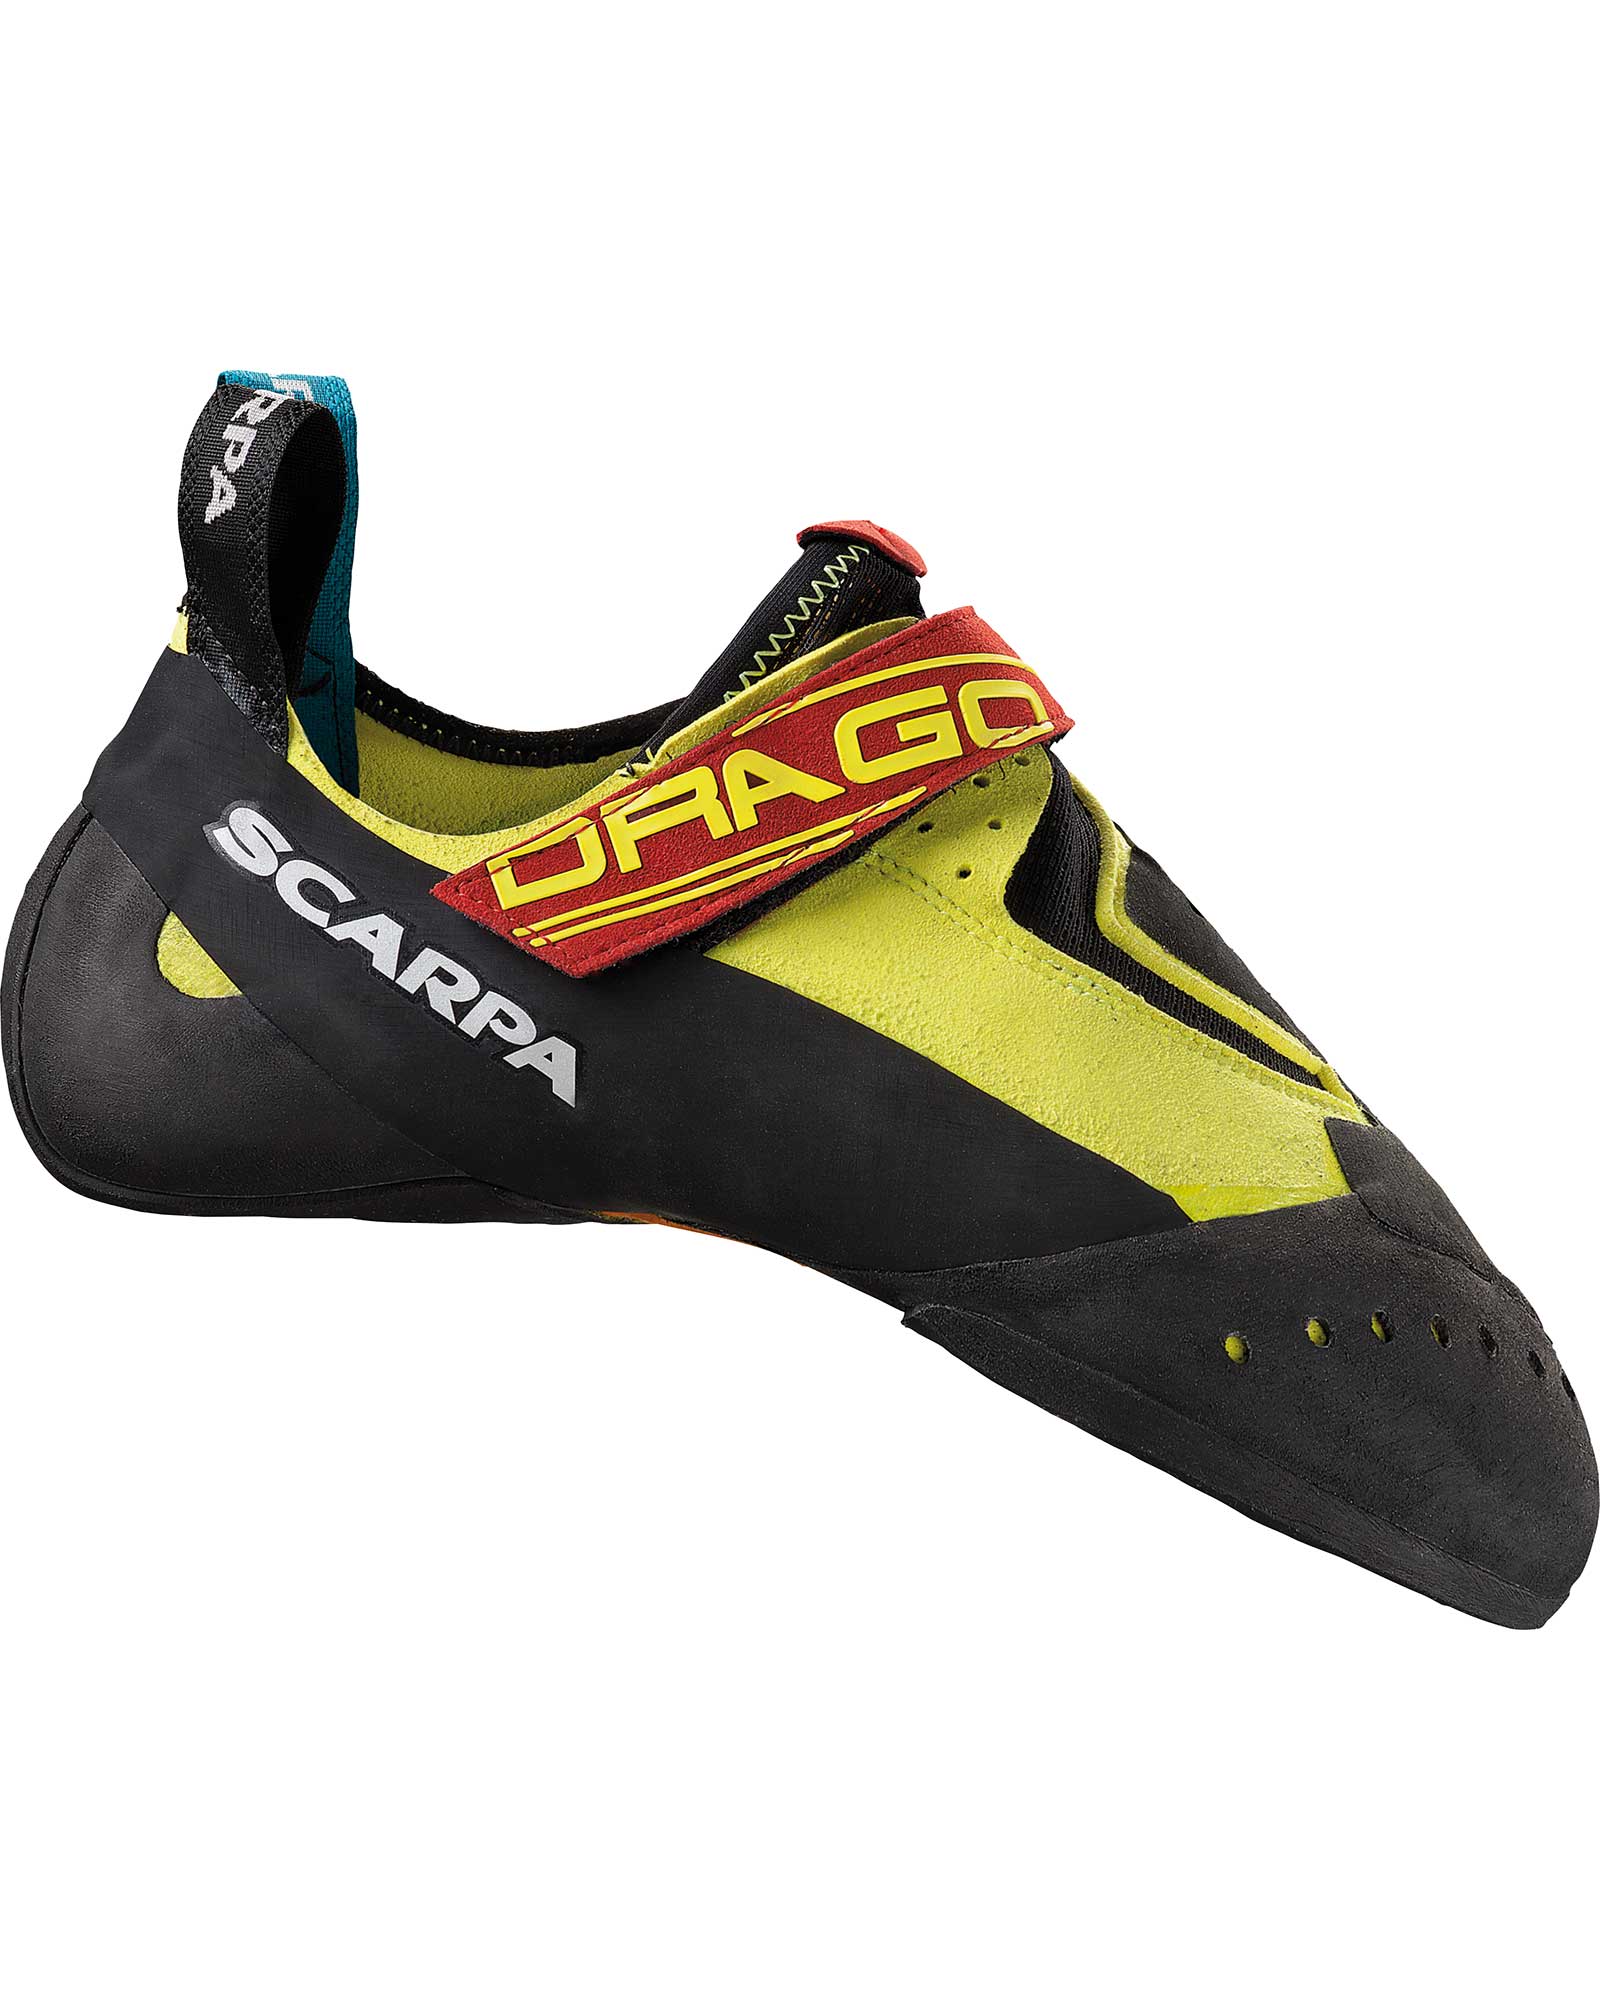 Product image of Scarpa Drago Men's Shoes